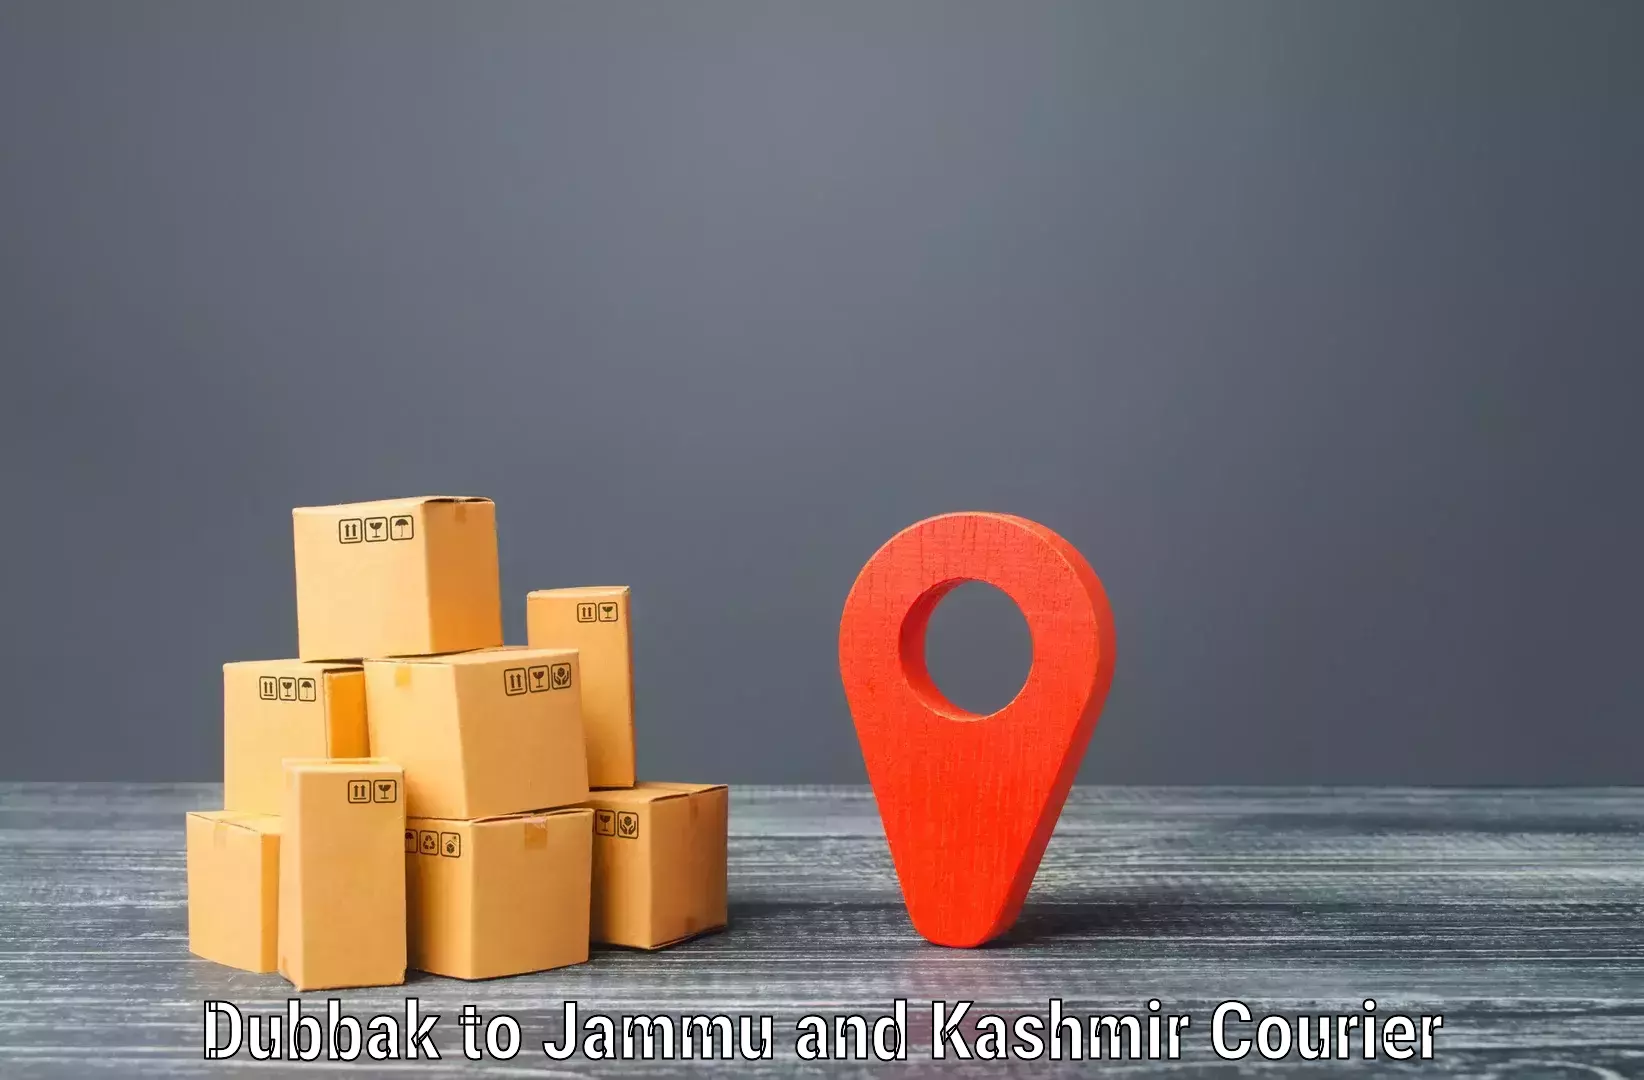 Global shipping networks in Dubbak to Jammu and Kashmir